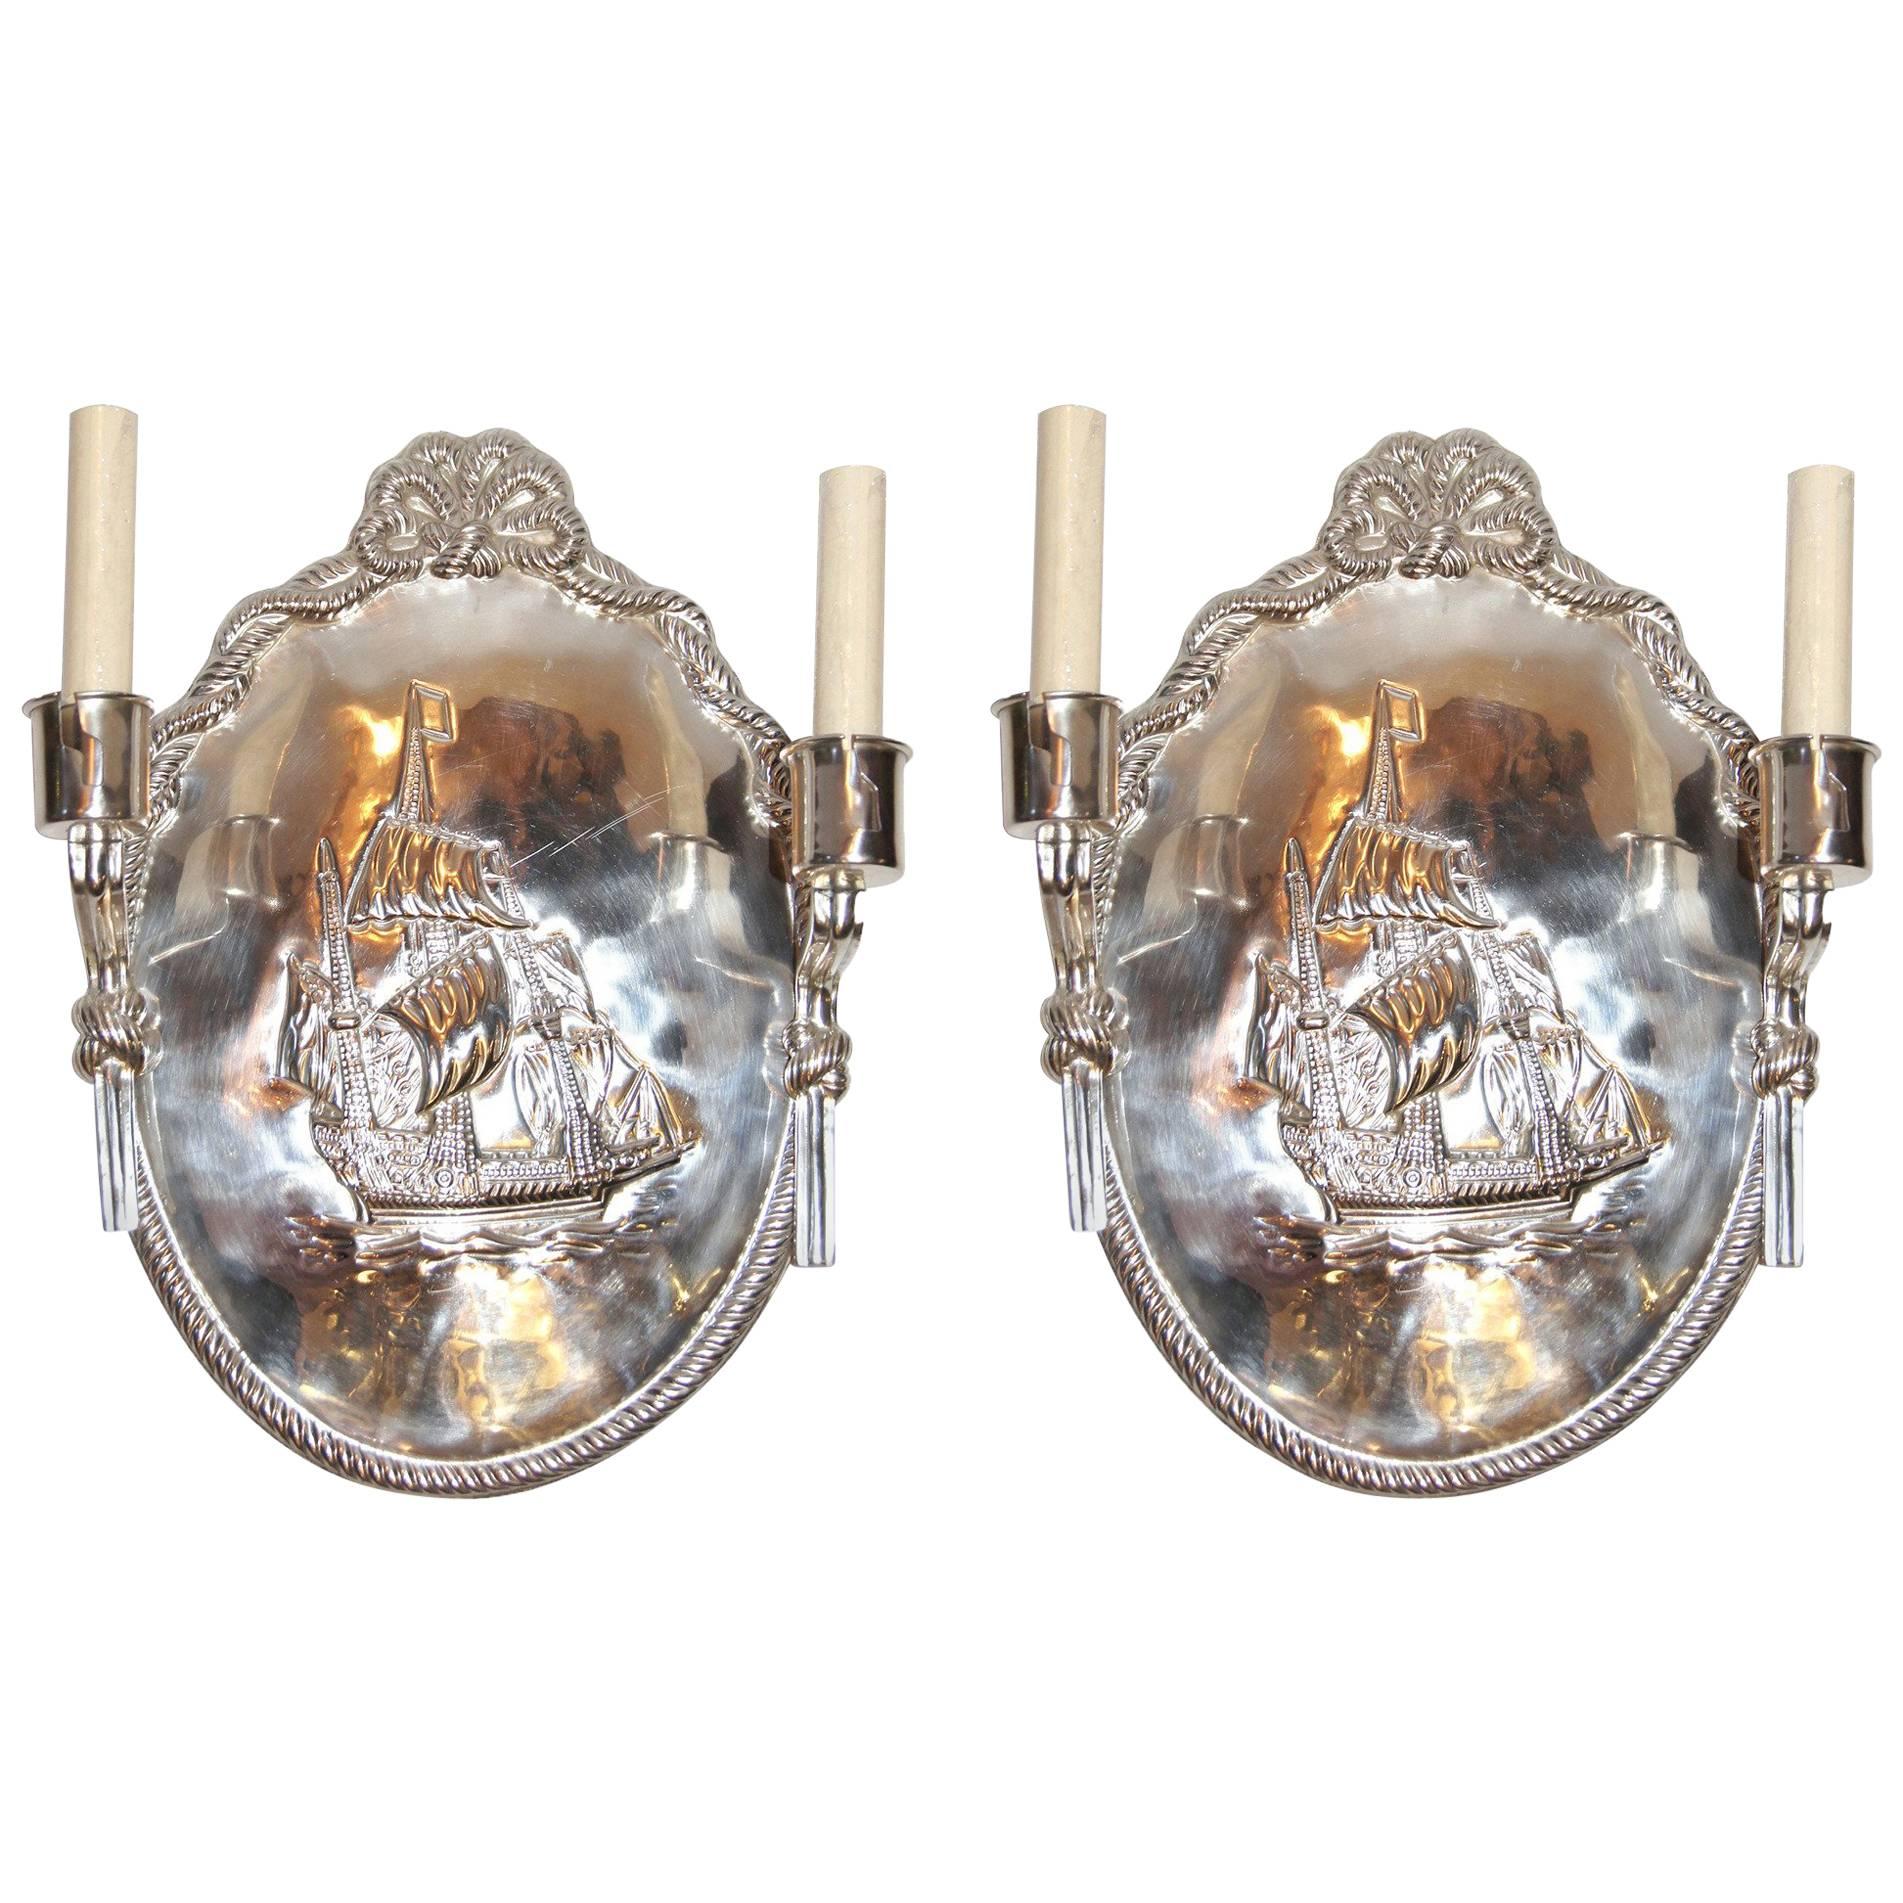 Set of Nautical Oval Silver Plated Sconces, Sold per Pair